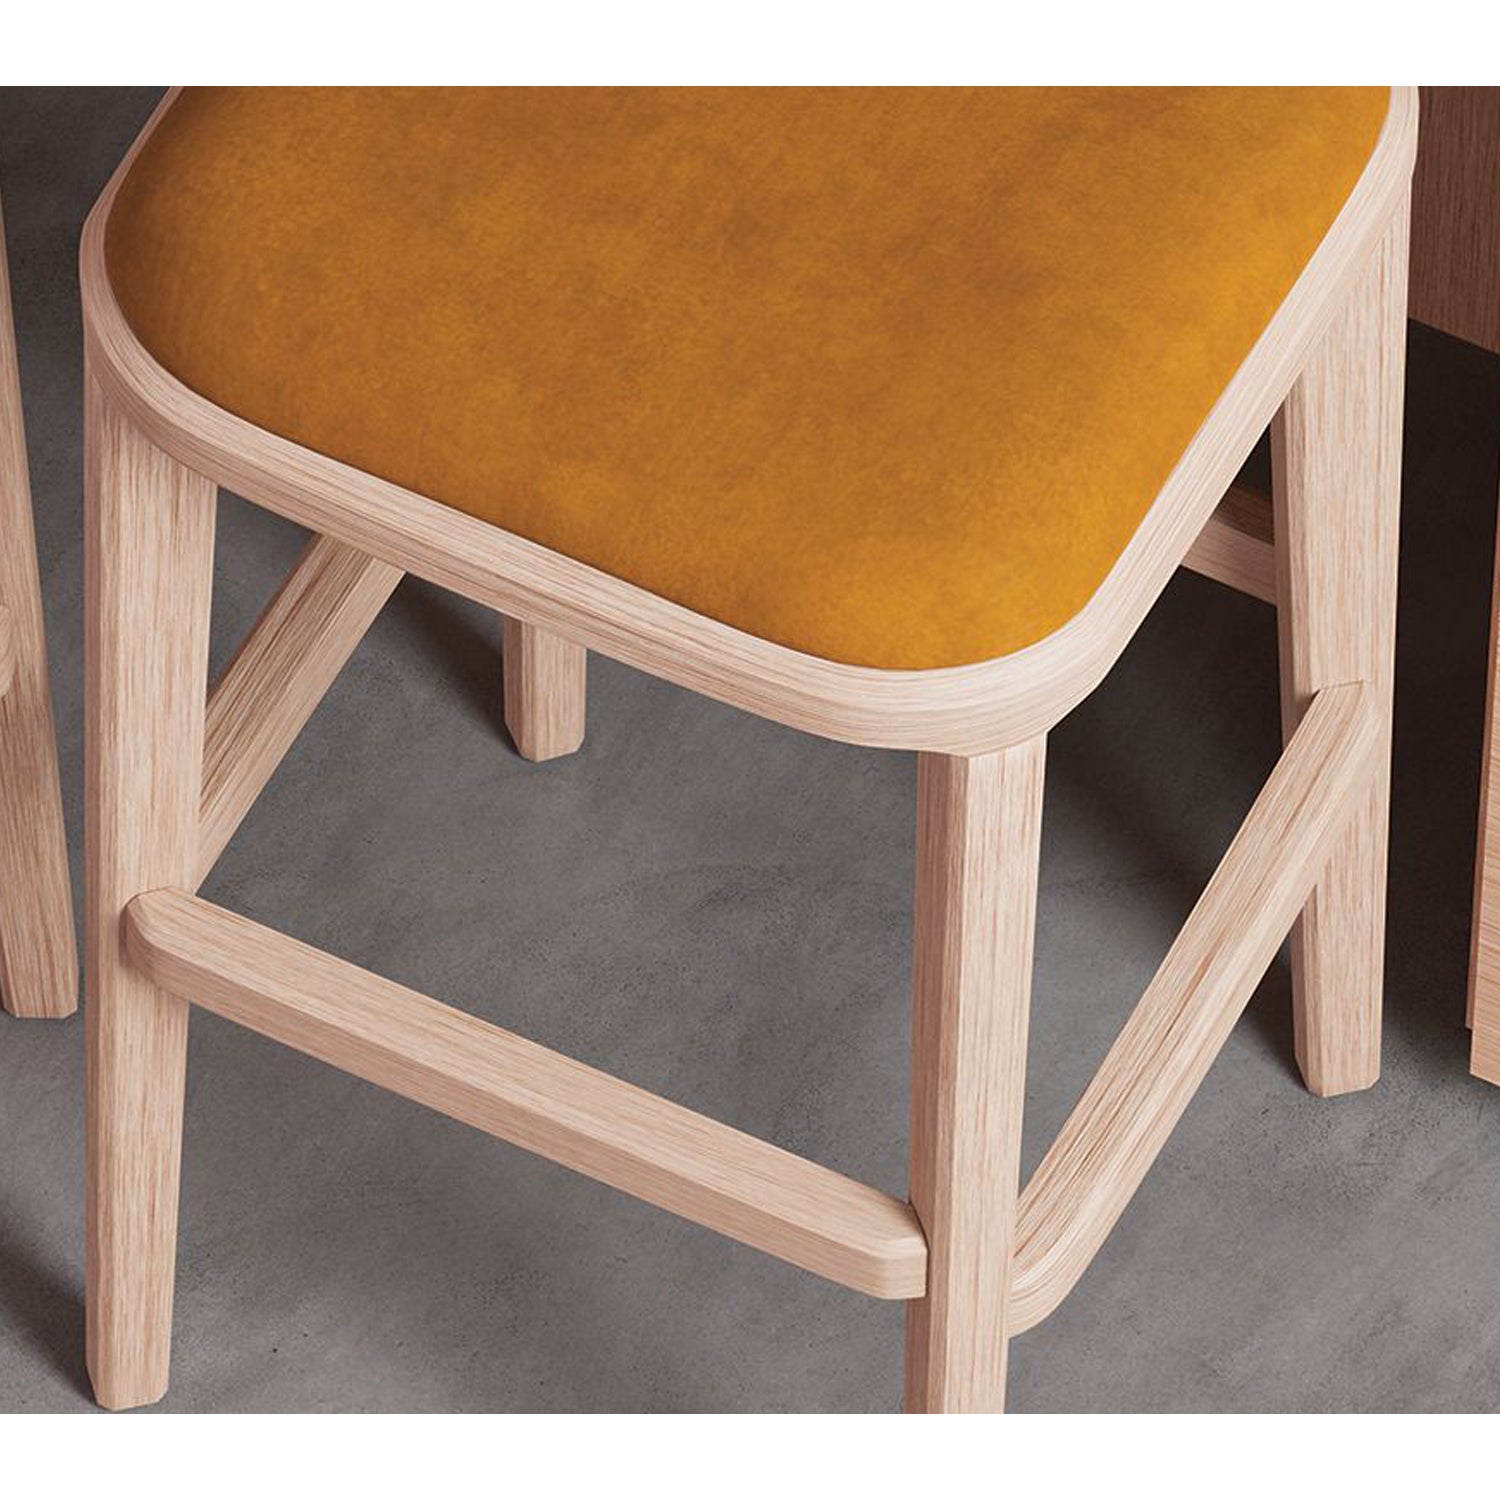 Damble Stool by Imperial Line